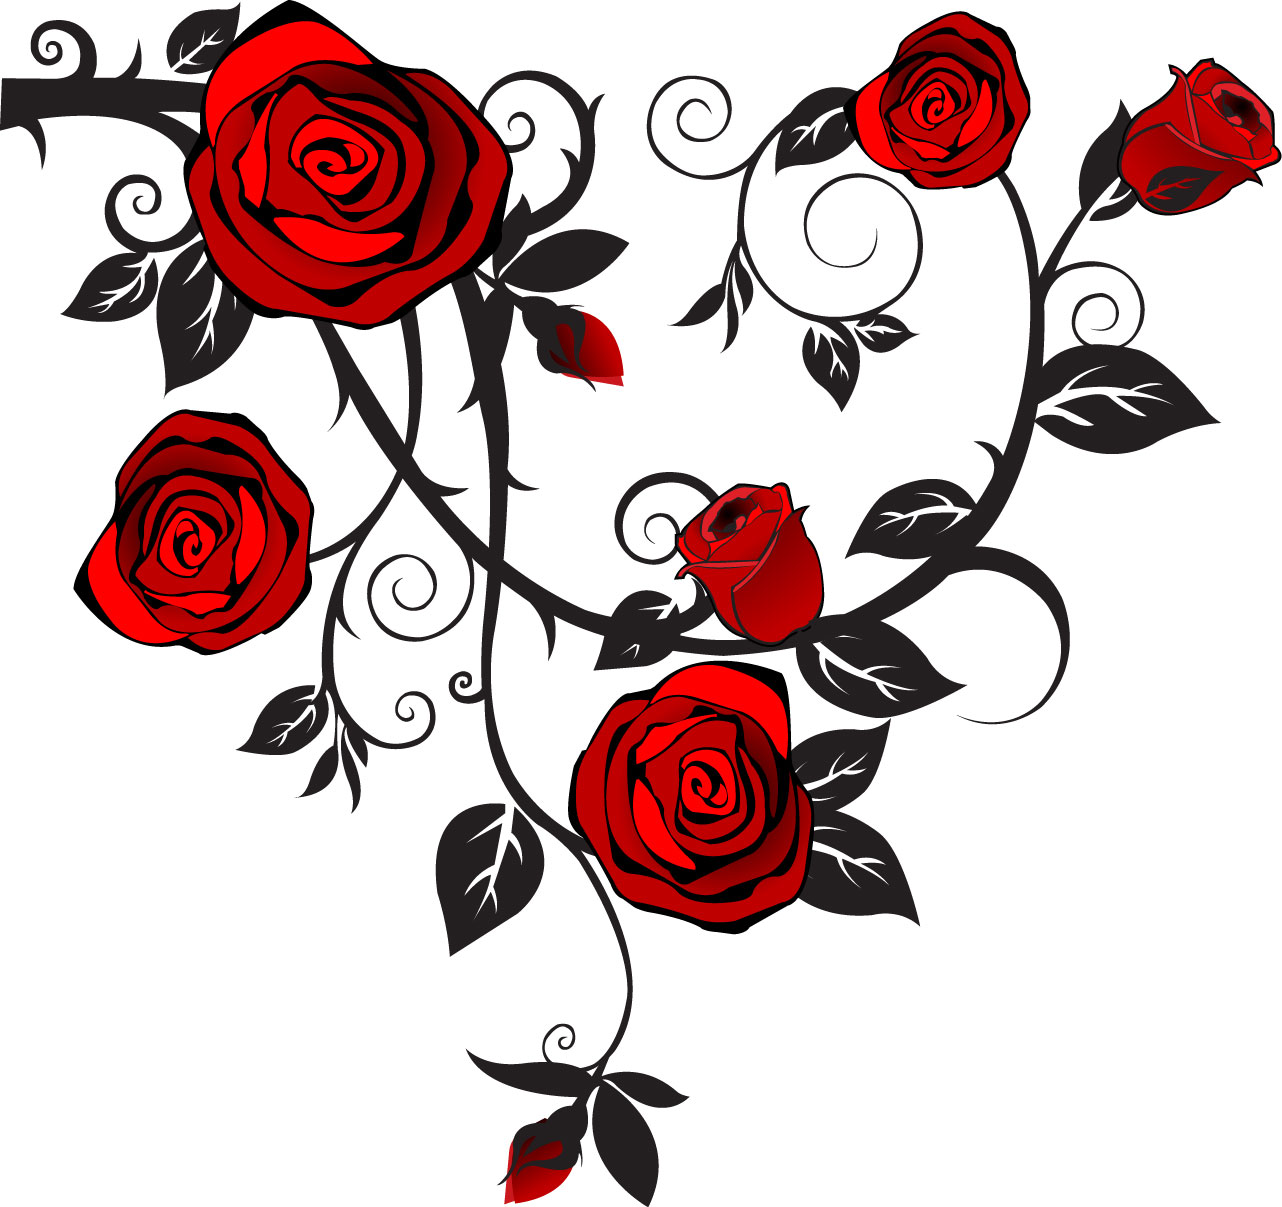 Download Rose | Free Images at Clker.com - vector clip art online, royalty free & public domain